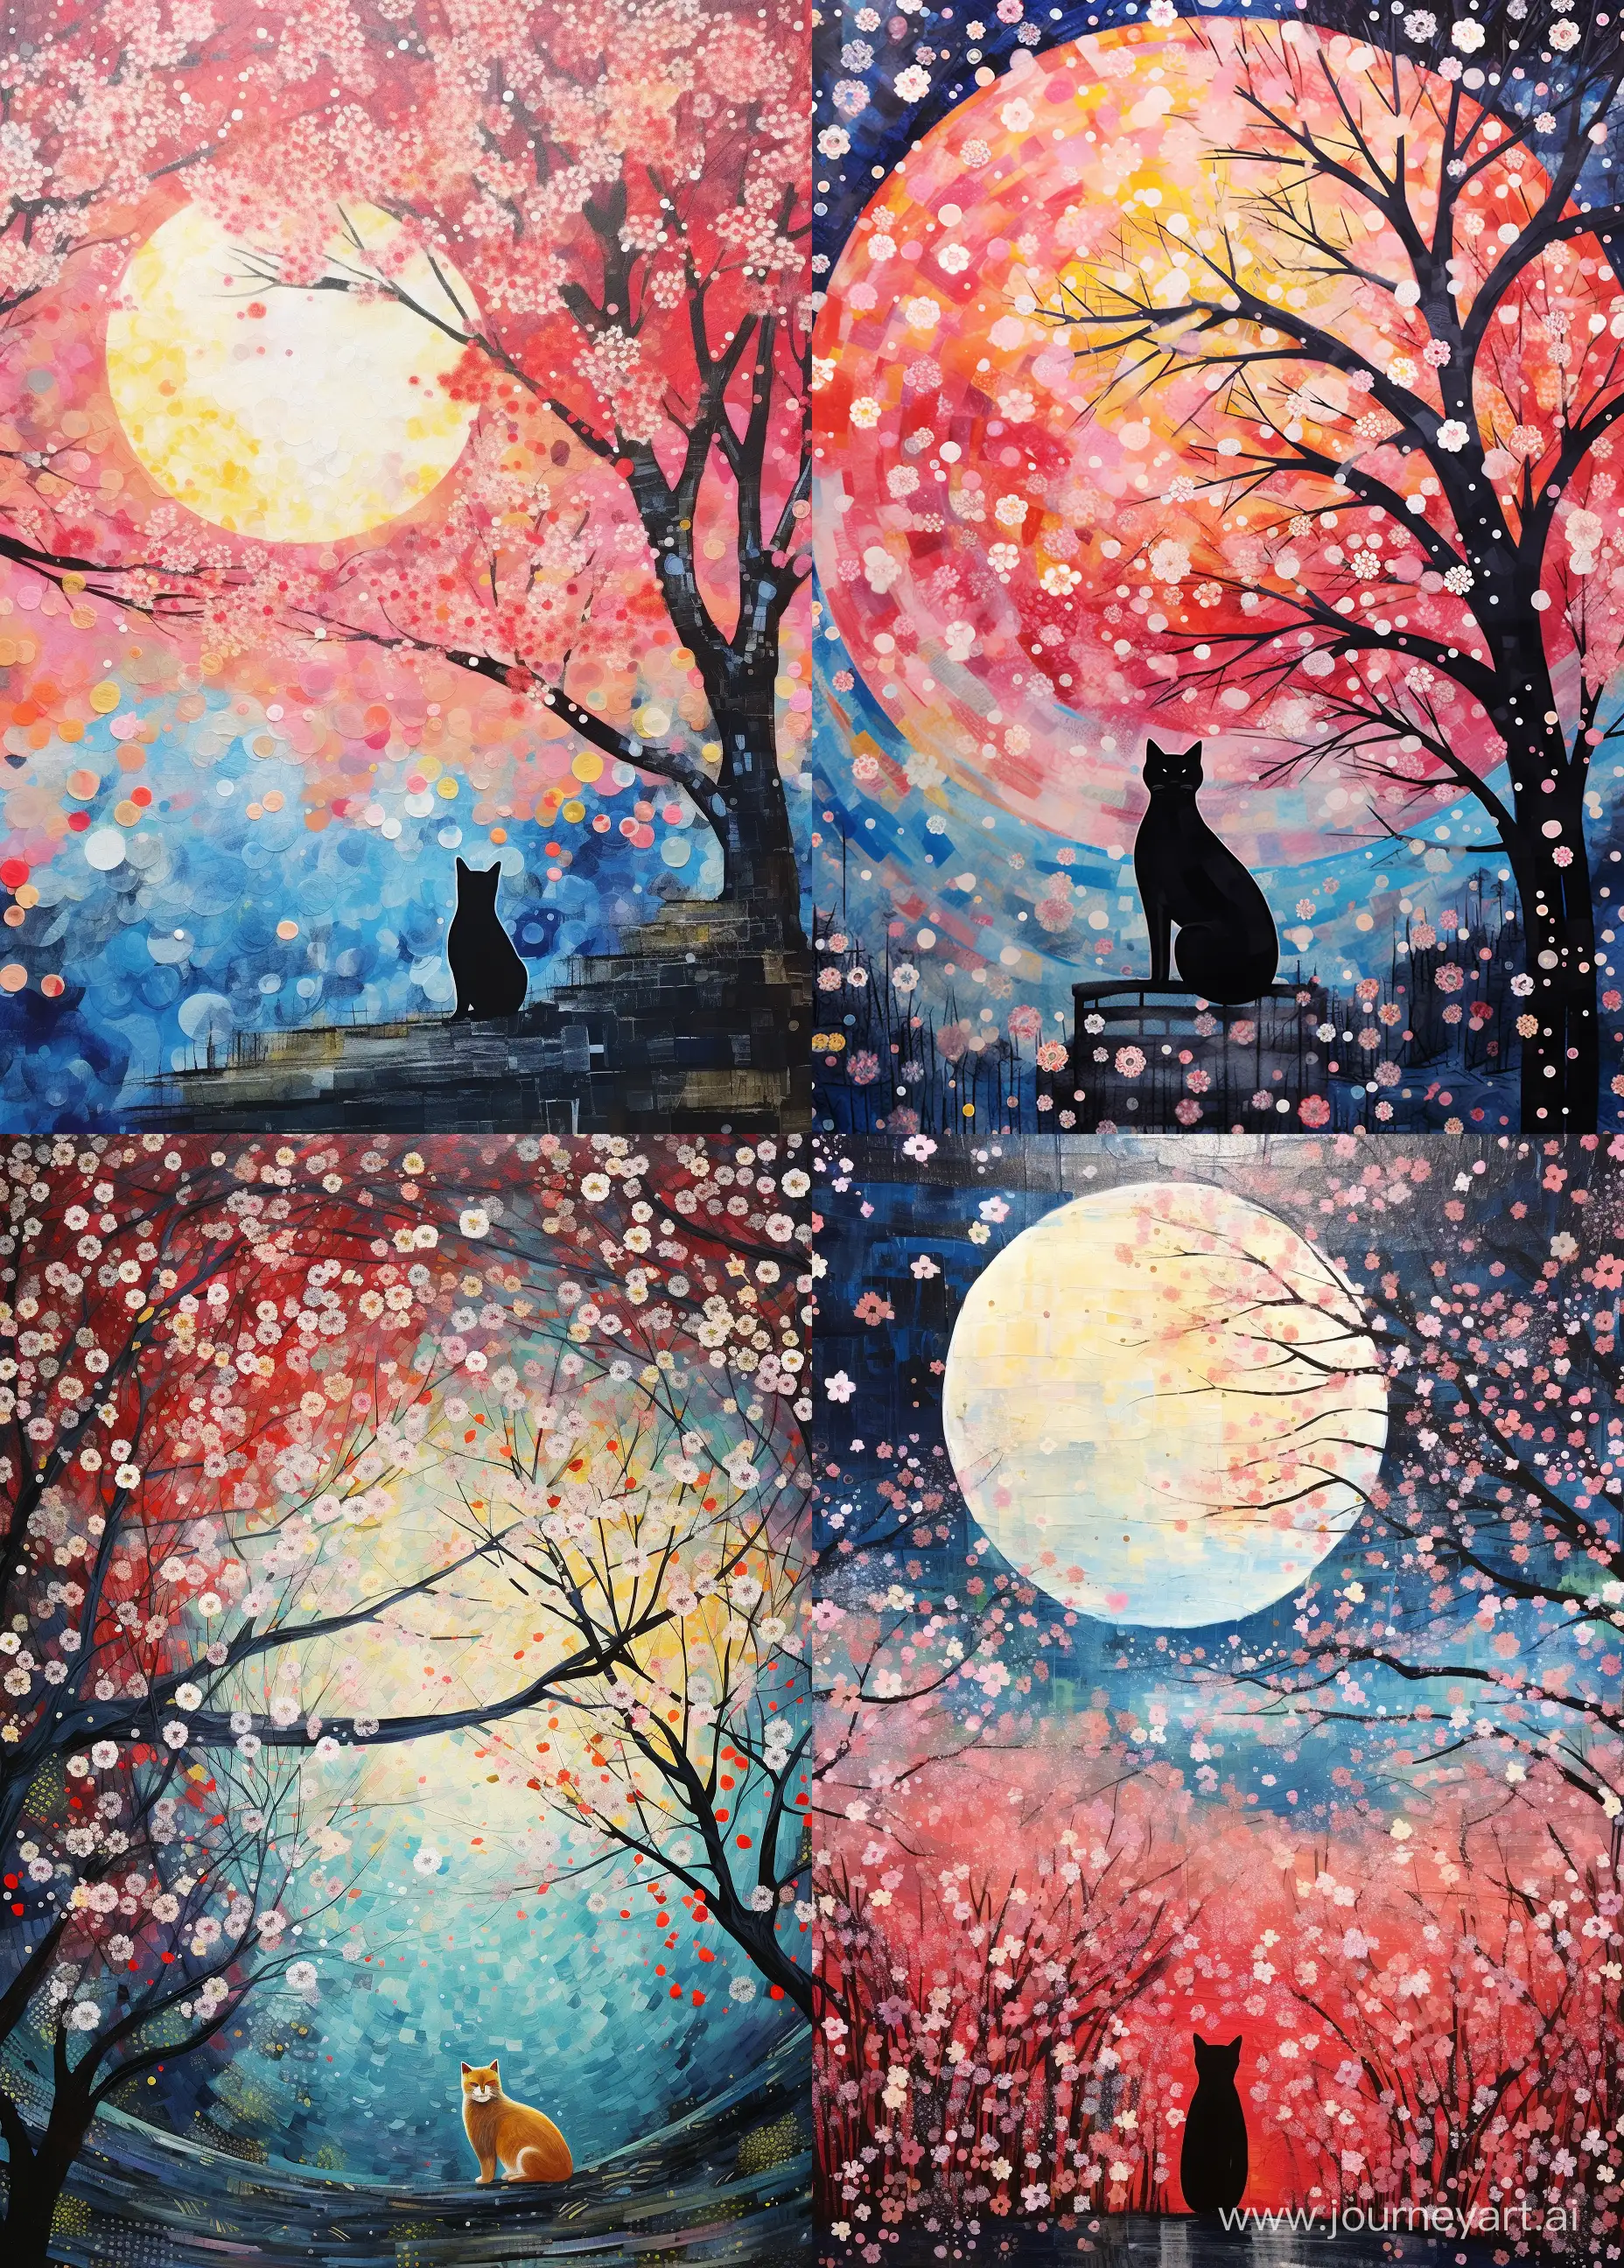 Whimsical-Eric-CarleInspired-Scene-Sleeping-Cat-under-a-Colorful-Galaxy-with-Cherry-Blossoms-and-Full-Moon